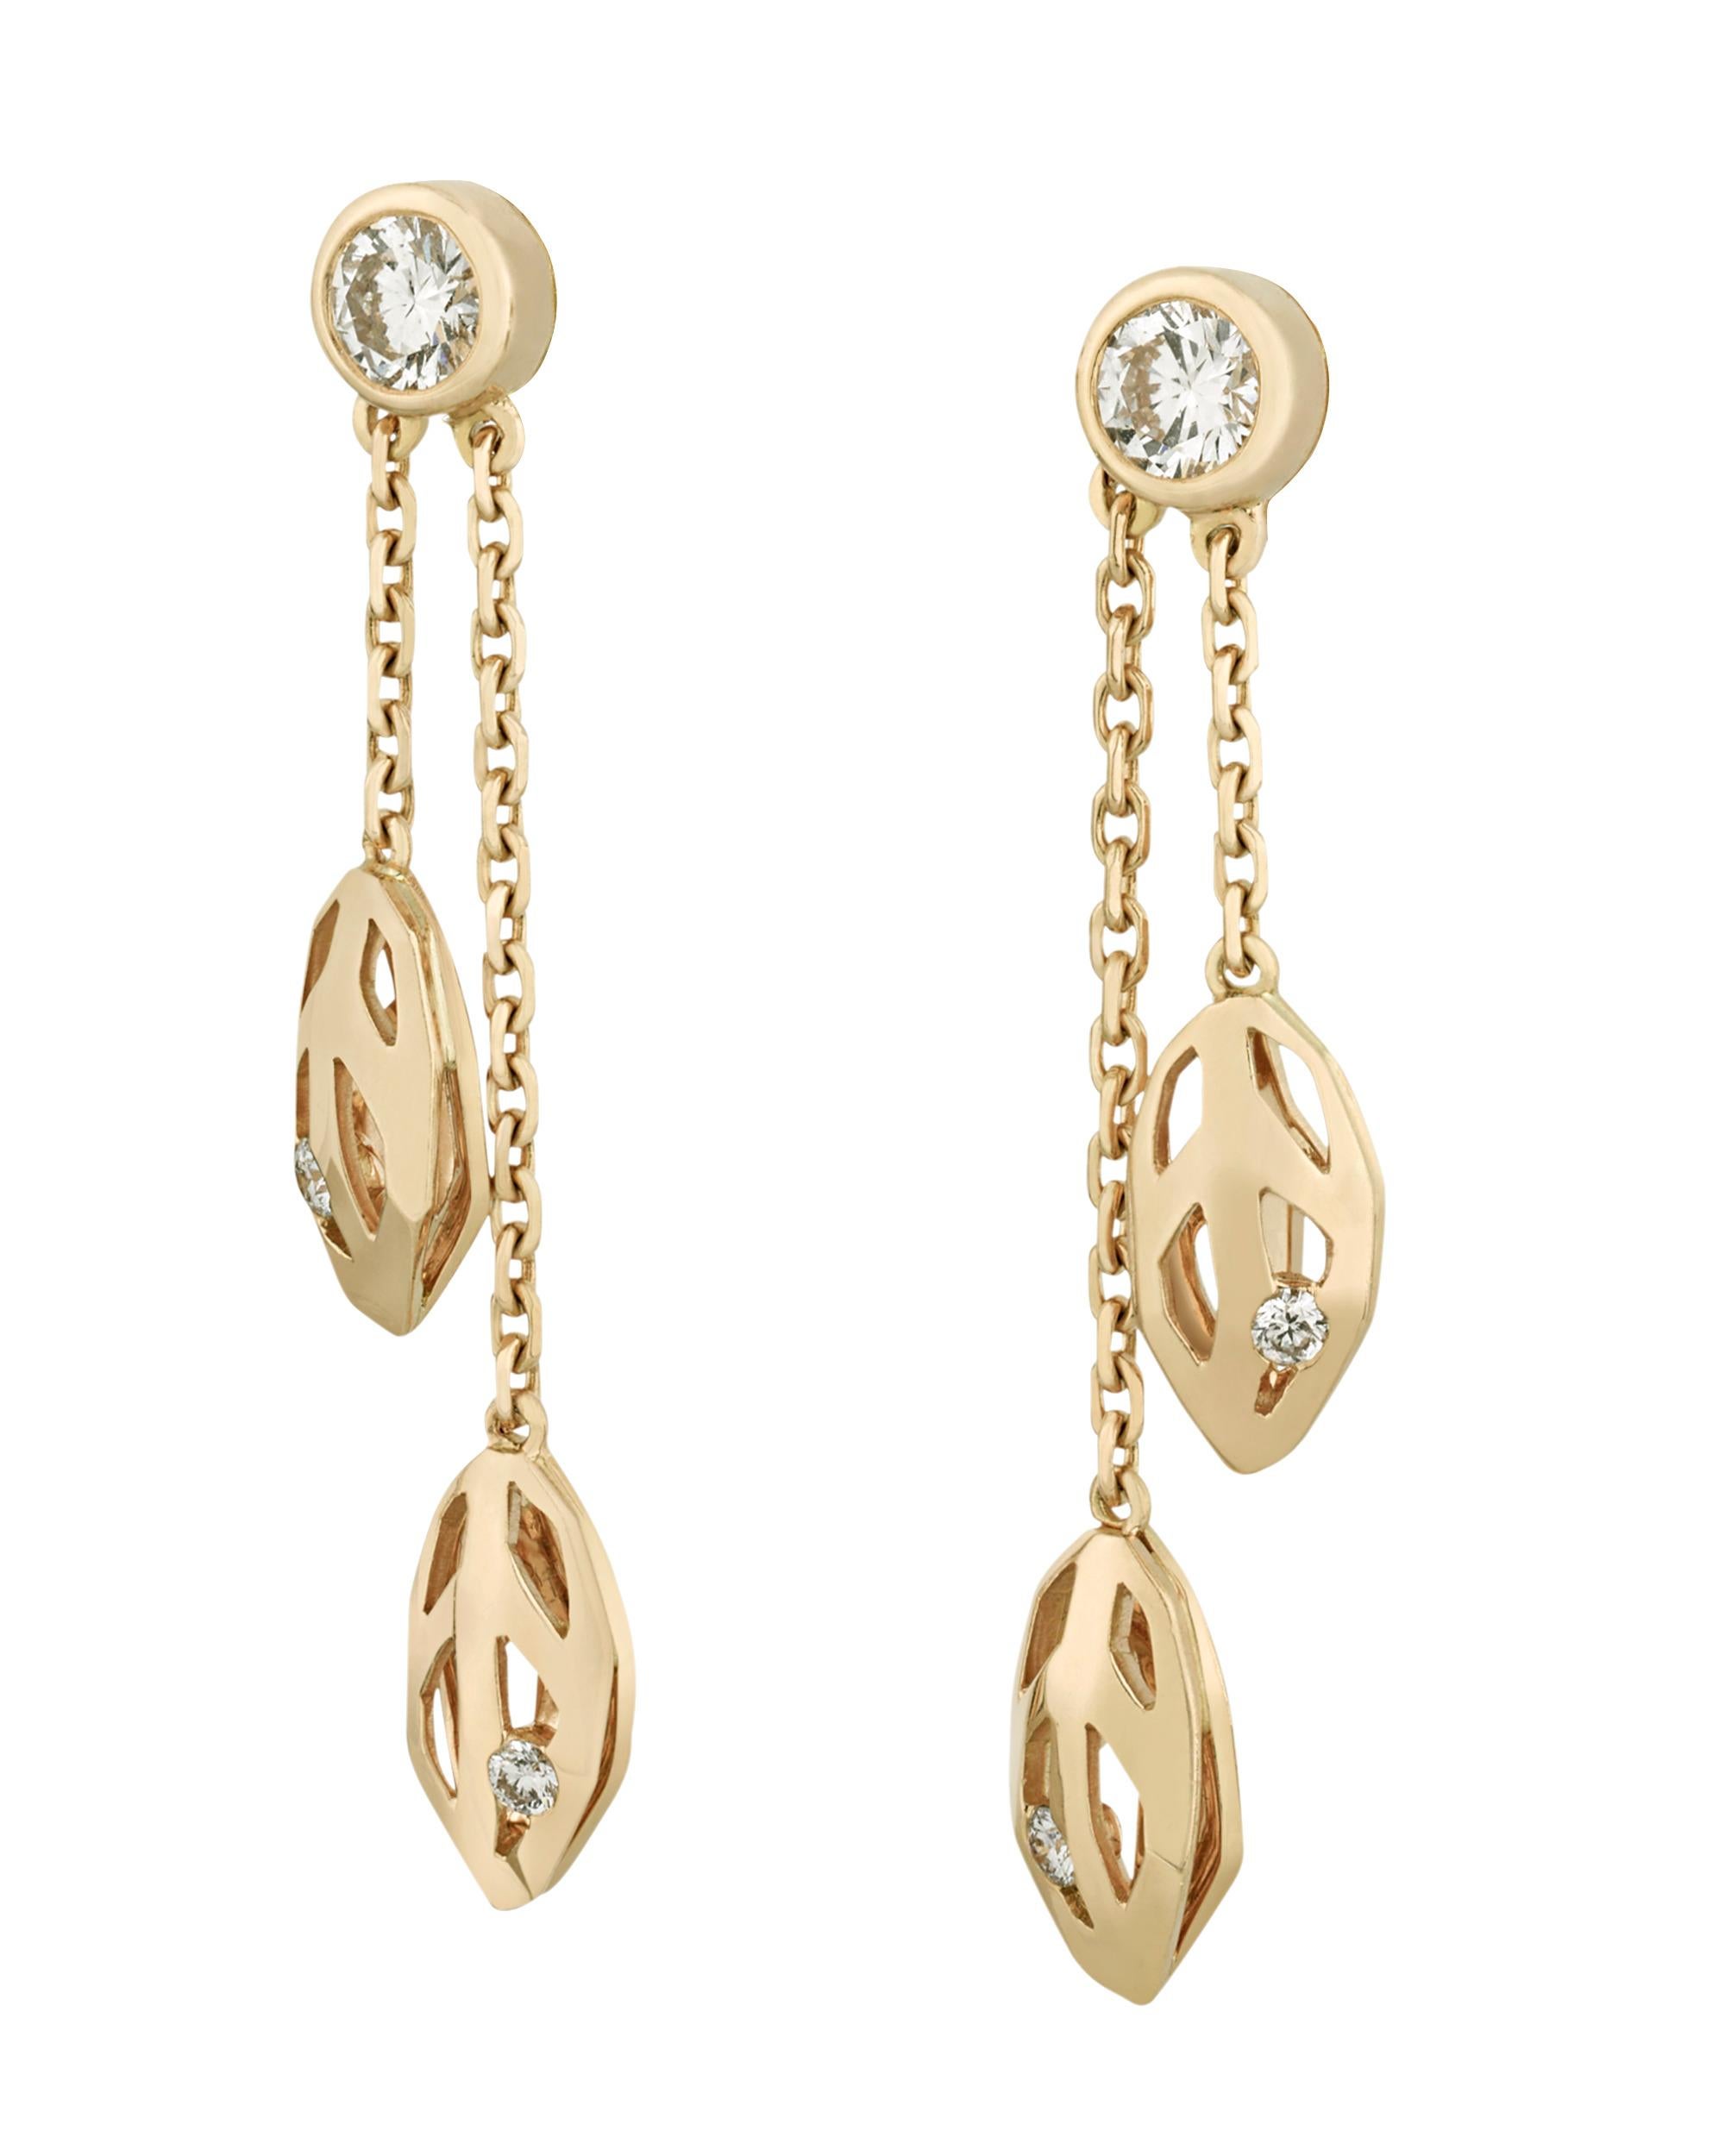 Inspired by the graceful beauty of an orchid, these earrings from Cartier's Caresse d'Orchidées collection are a brilliant example of the firm's creative genius. Crafted of 18K yellow gold, delicate foliate forms hang from white diamond studs adding